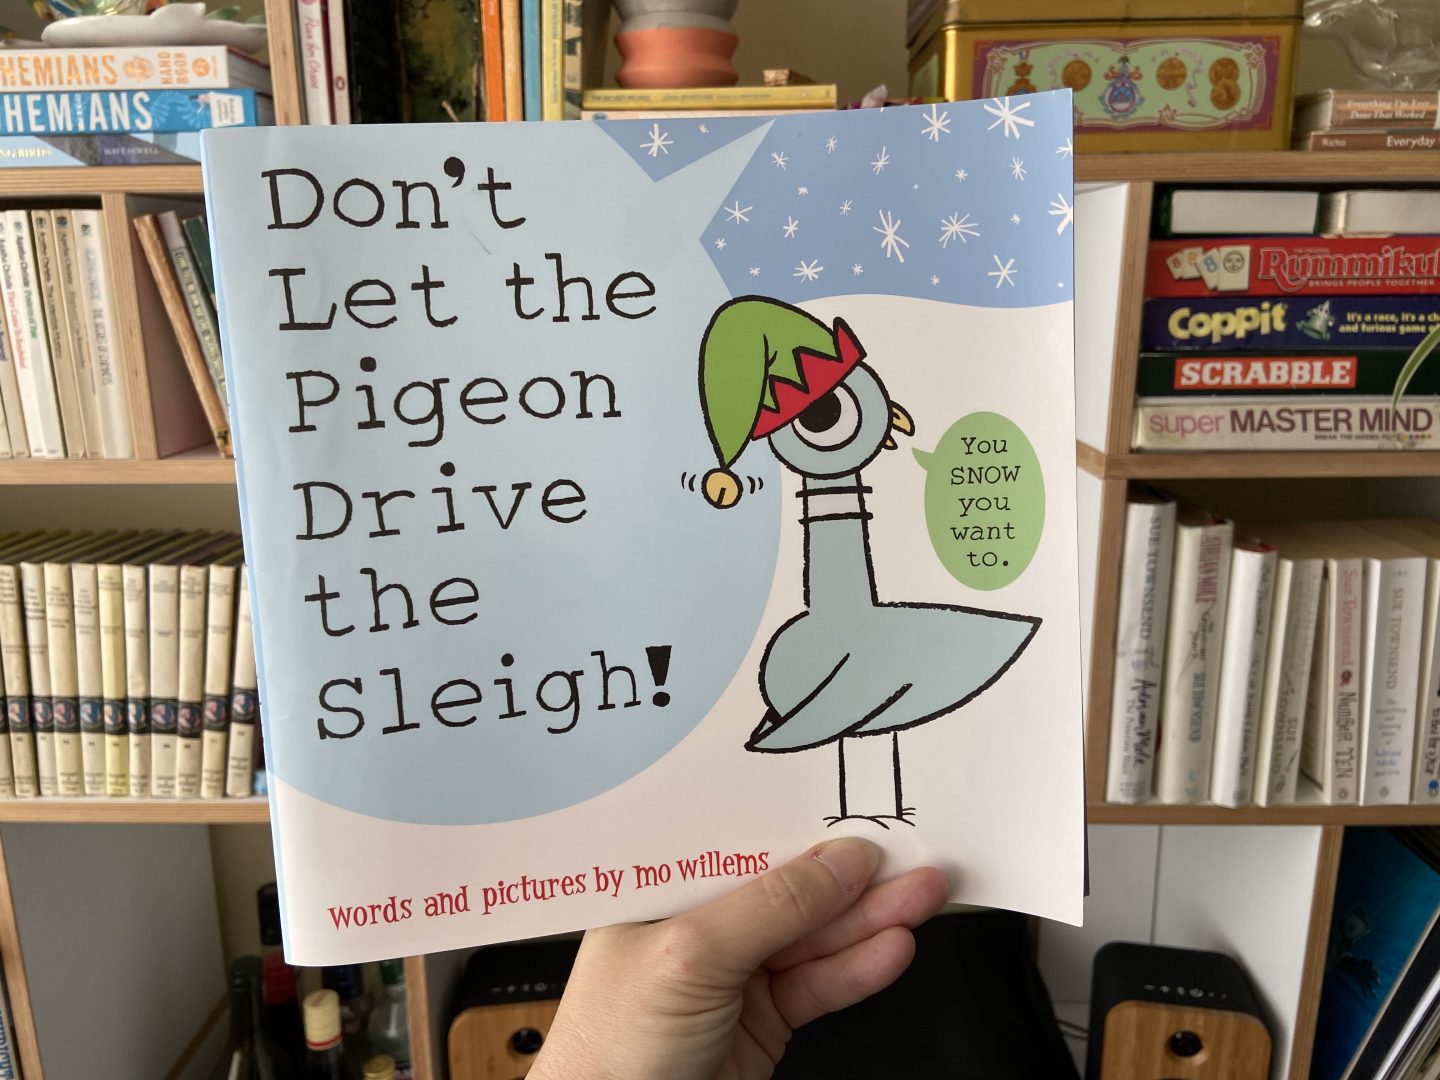 Don't Let The Pigeon Drive the Sleigh